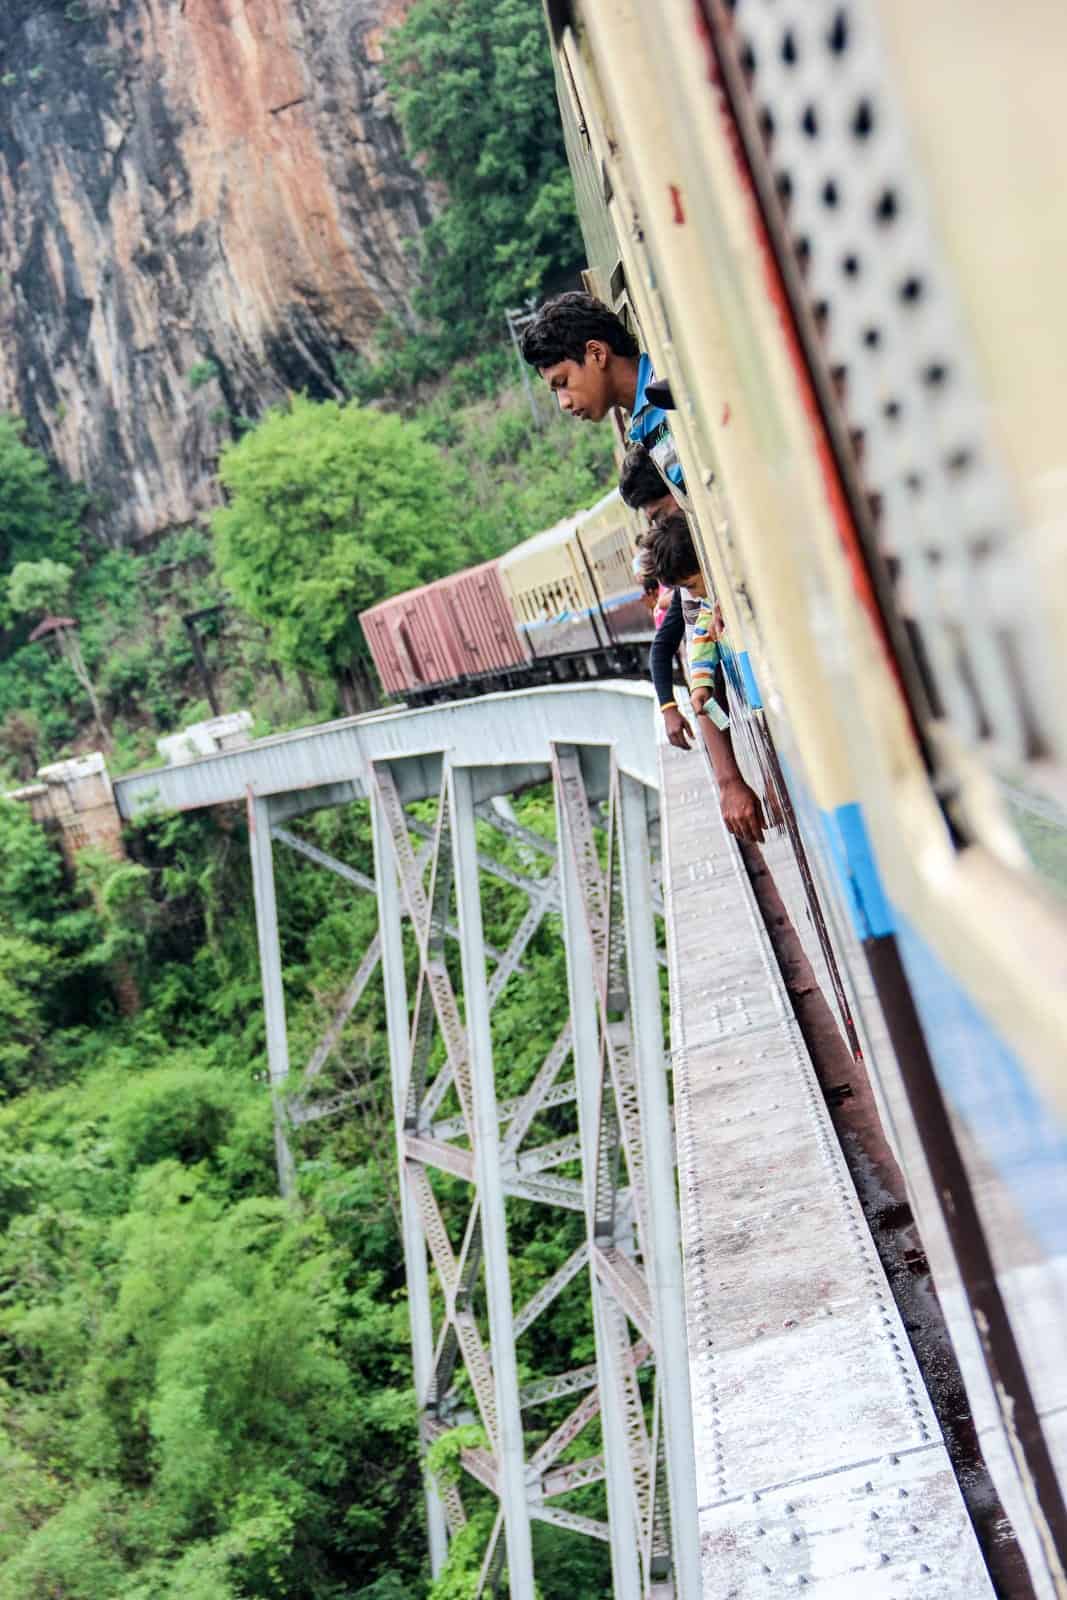 Looking out of the train window while crossing the Goteik Viaduct in Myanmar 